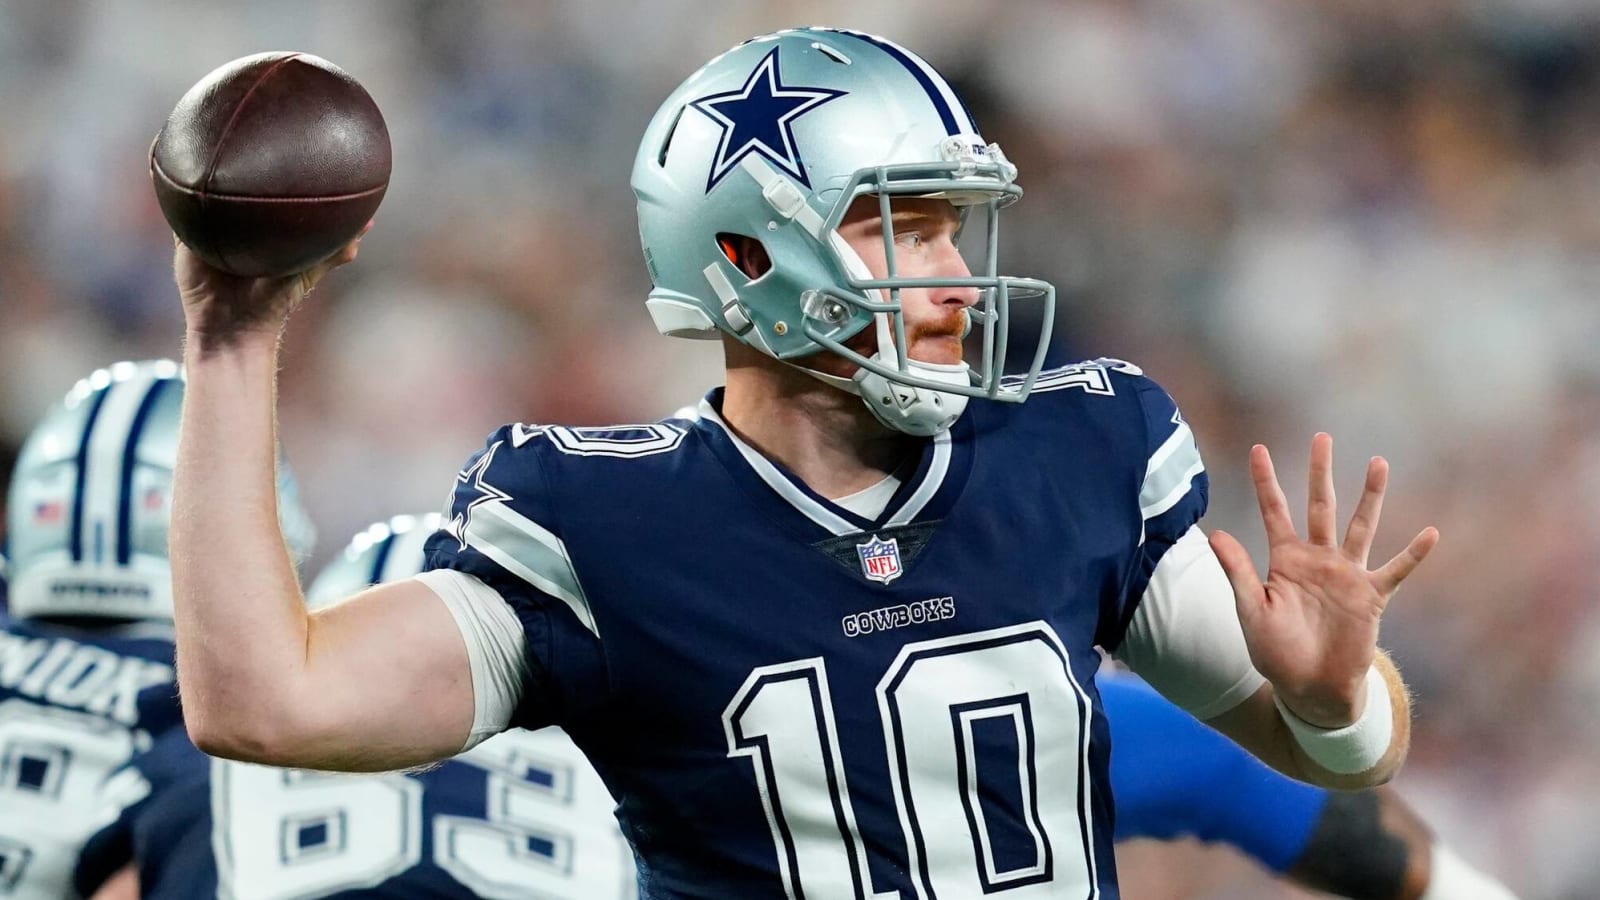 Cowboys fanboy Skip Bayless: QB Cooper Rush 'unspectacularly special'